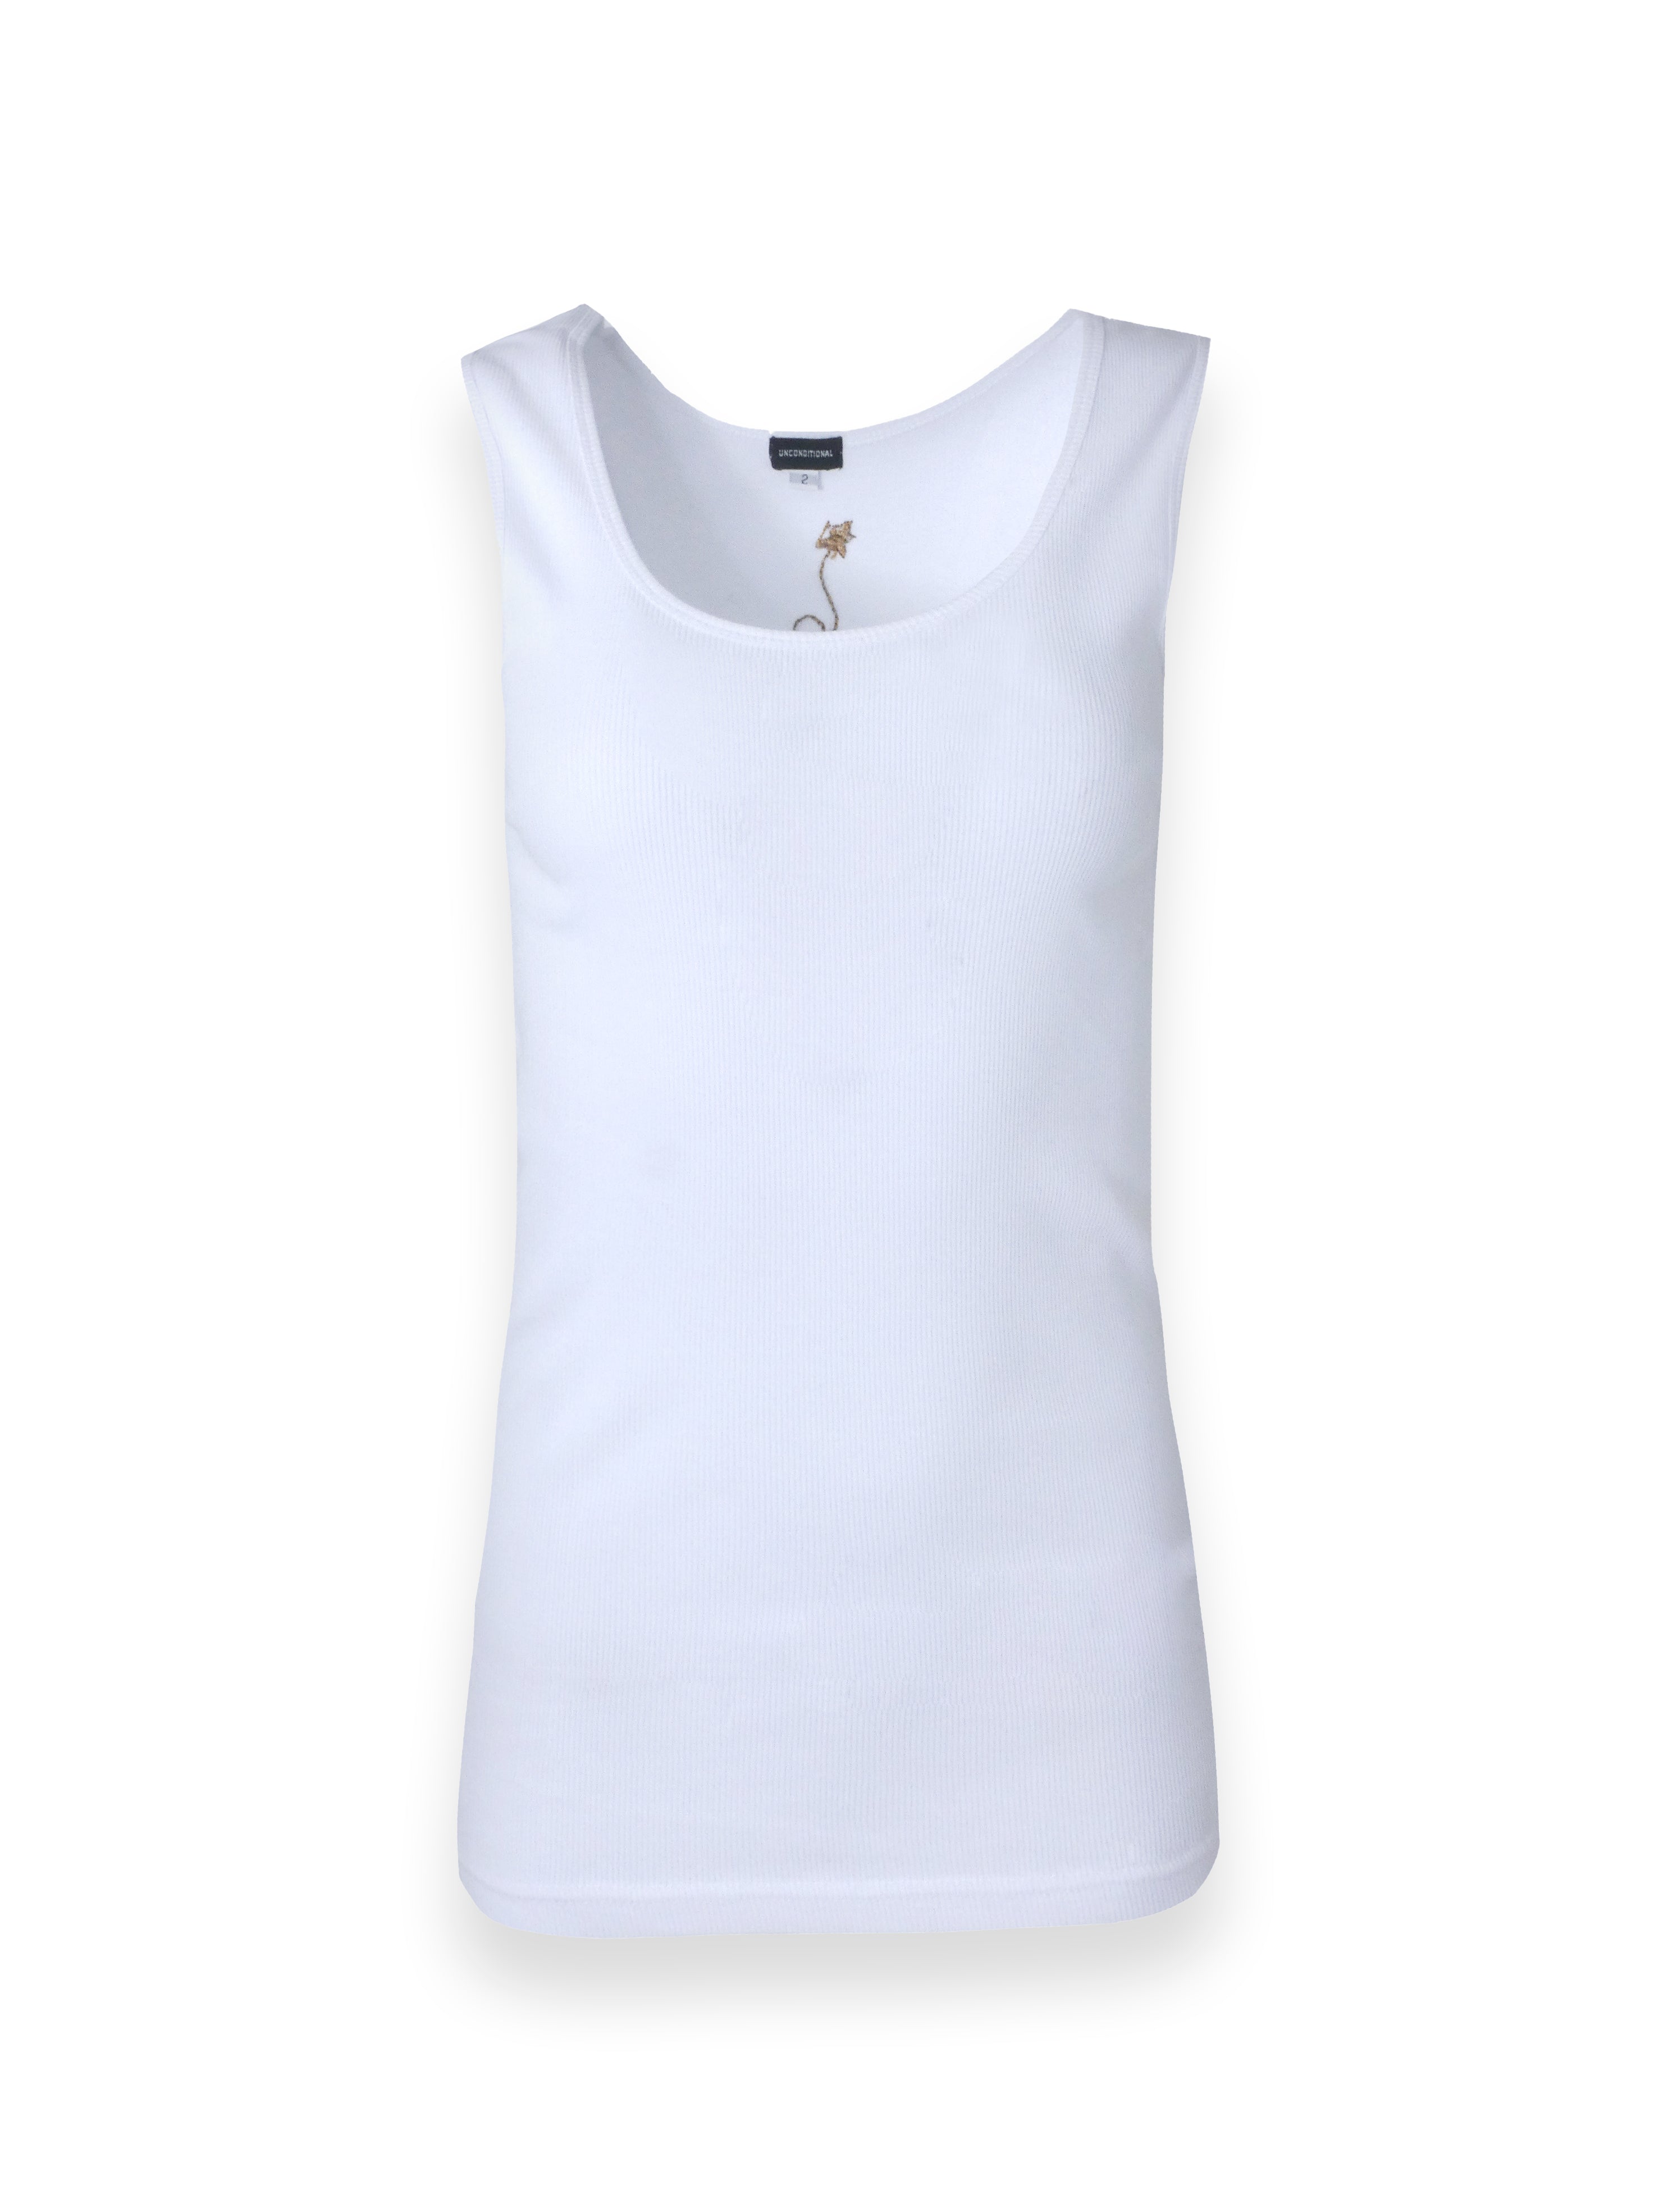 White Ribbed Vest With Anchor Design